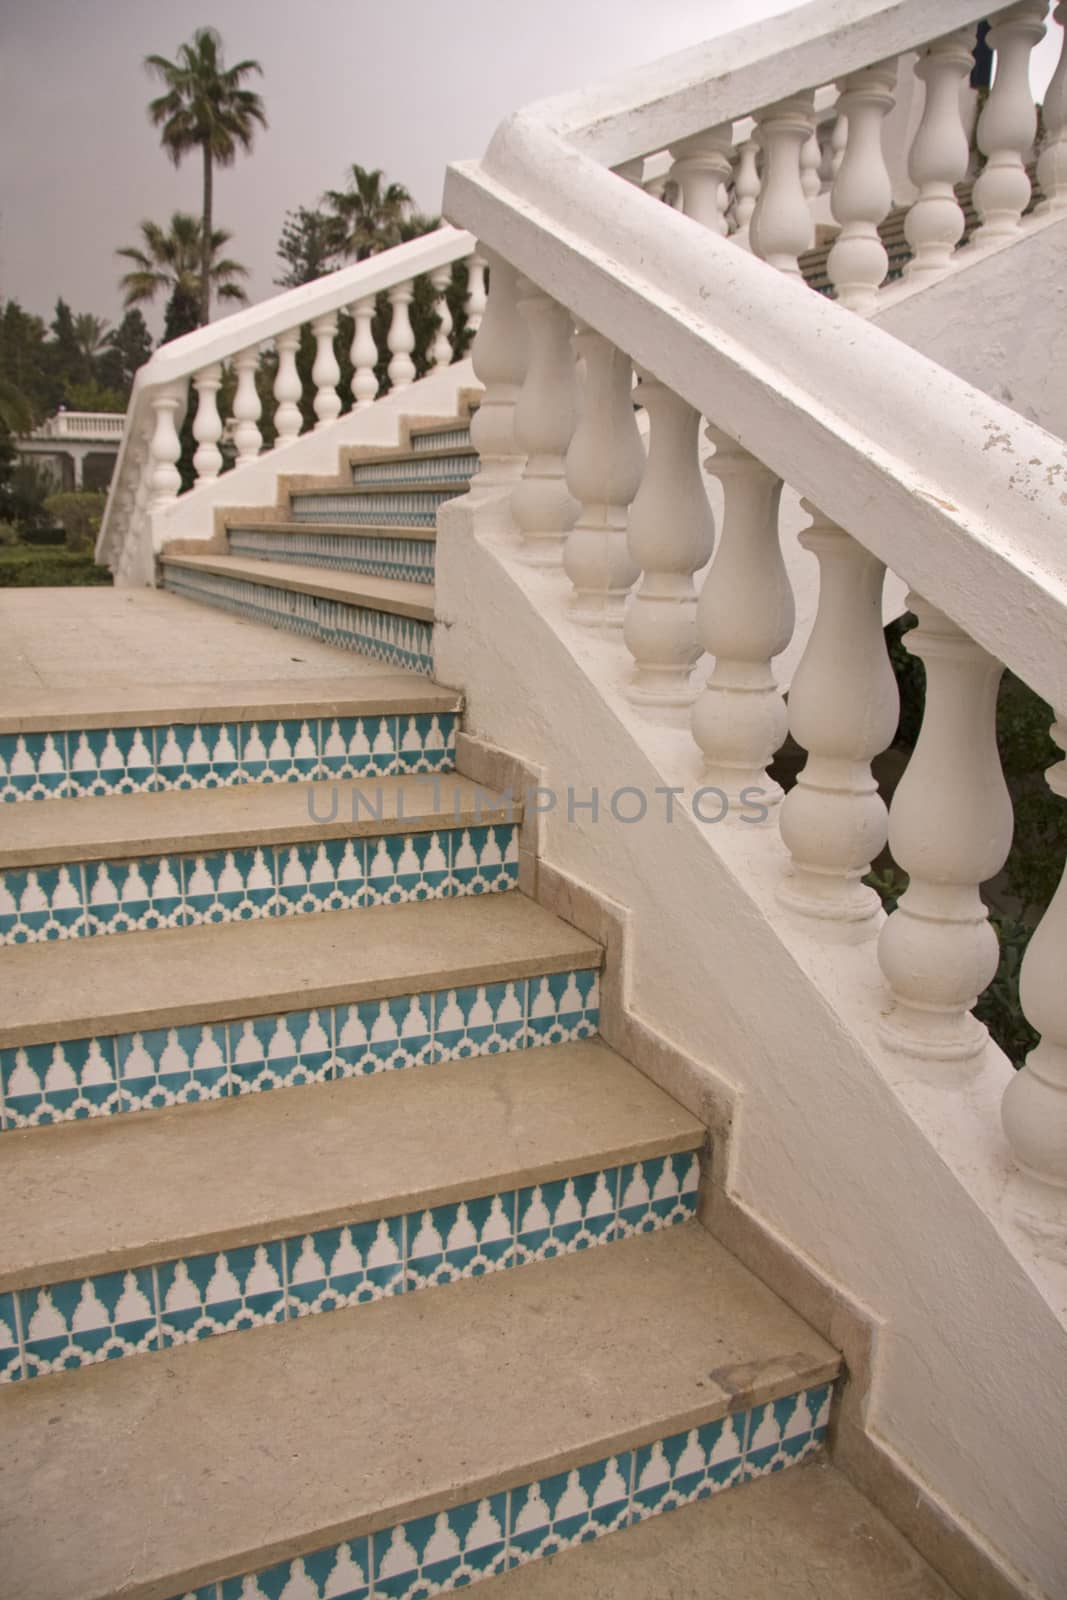 Decorated stairs in nice perspective by fotoecho